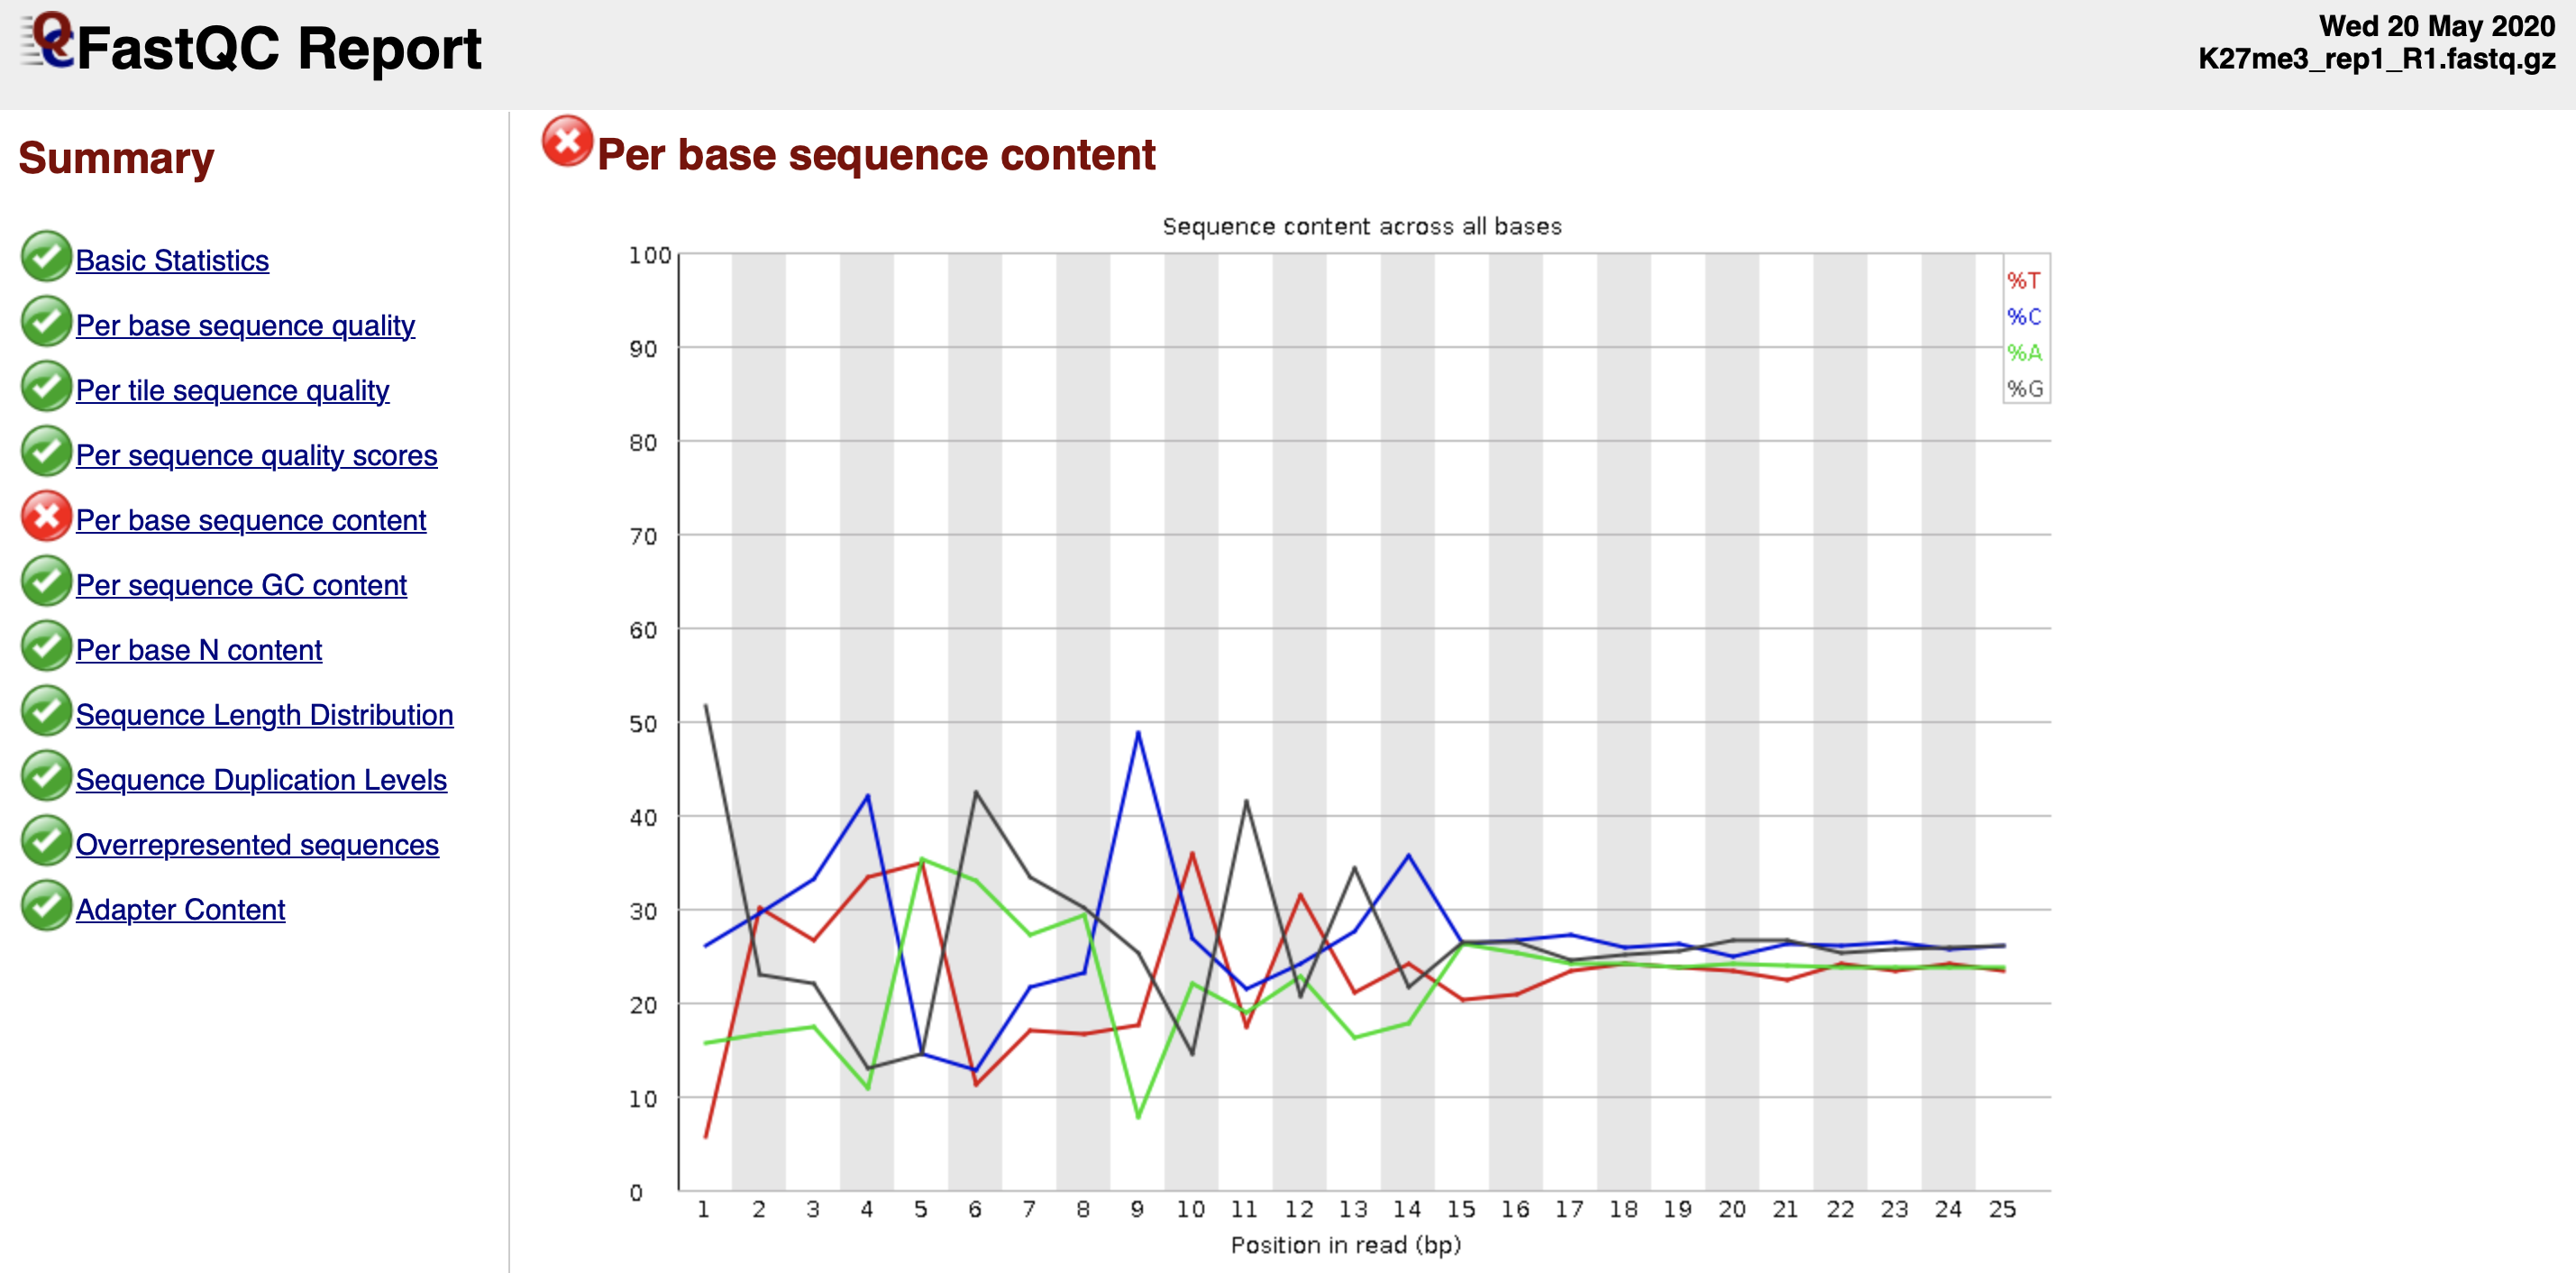 Figure 3. Per base sequence content fails the FastQC quality check.